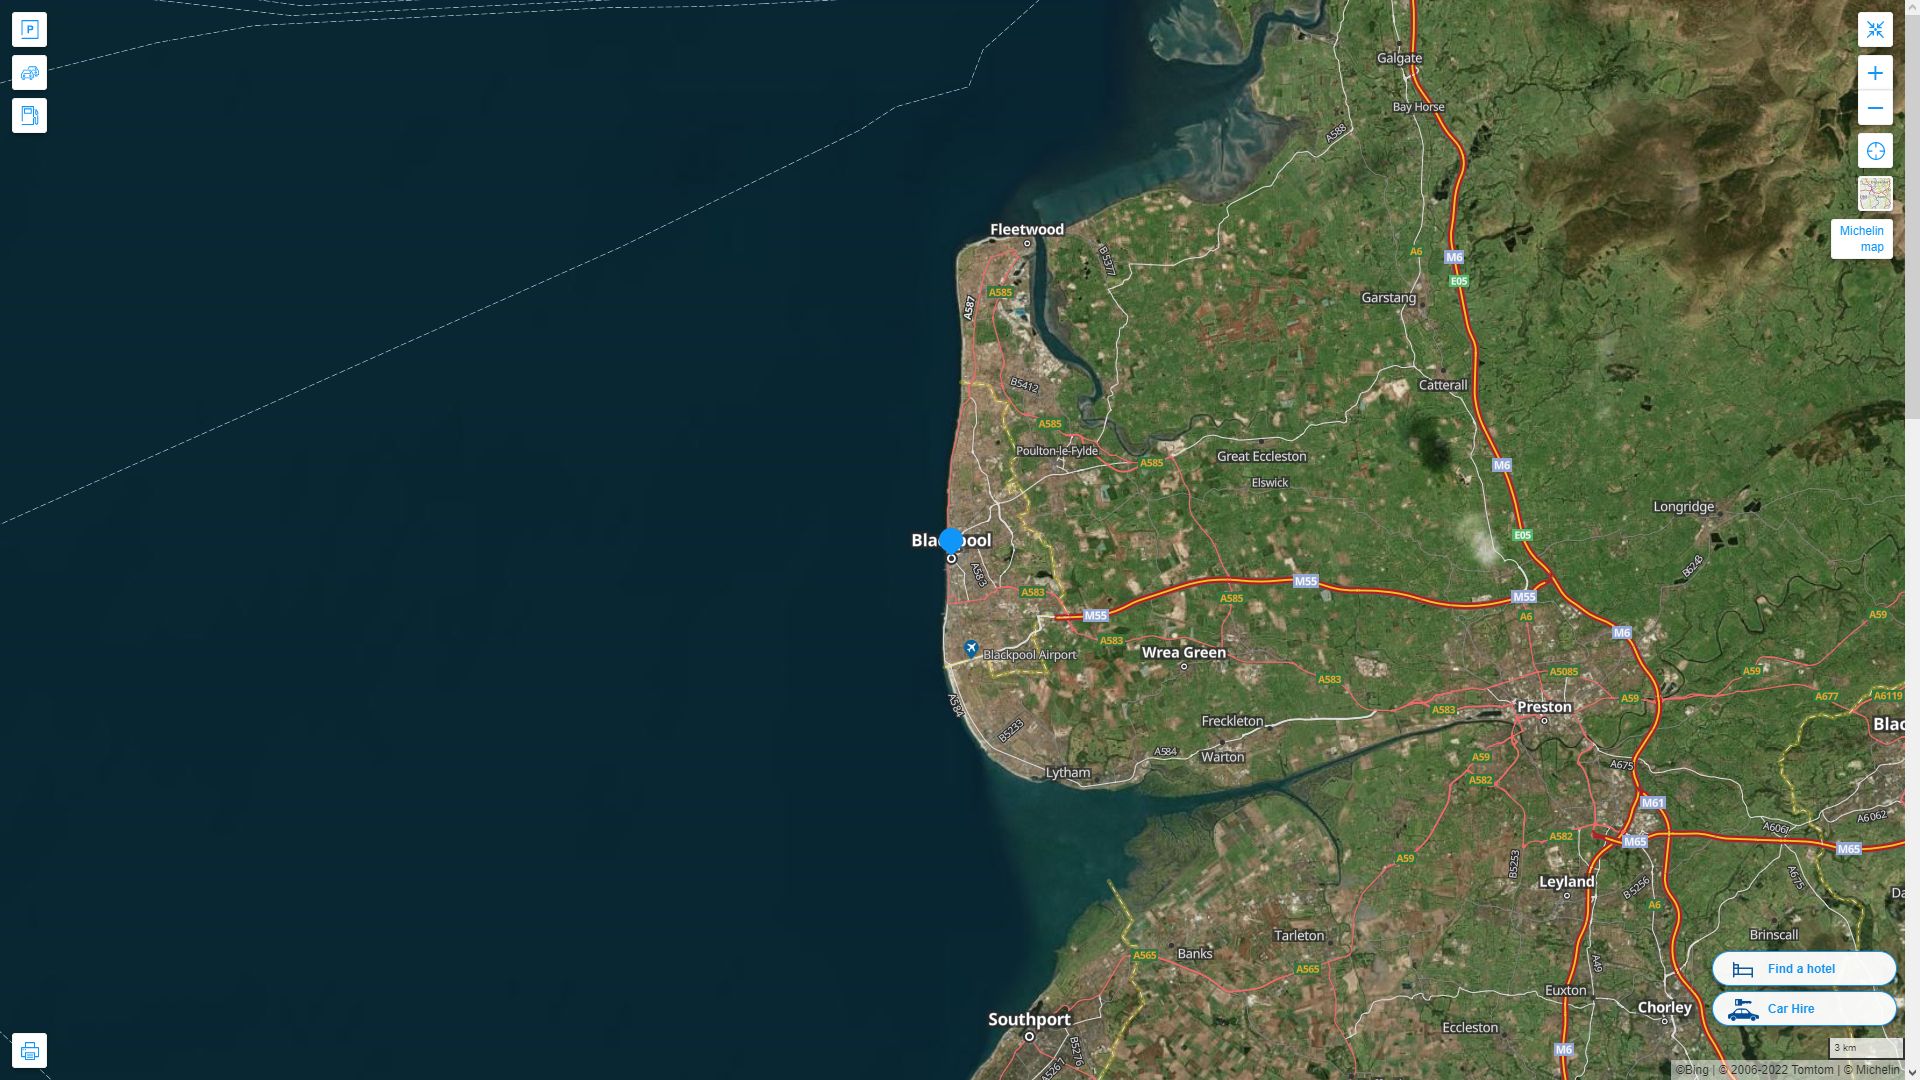 Blackpool Highway and Road Map with Satellite View